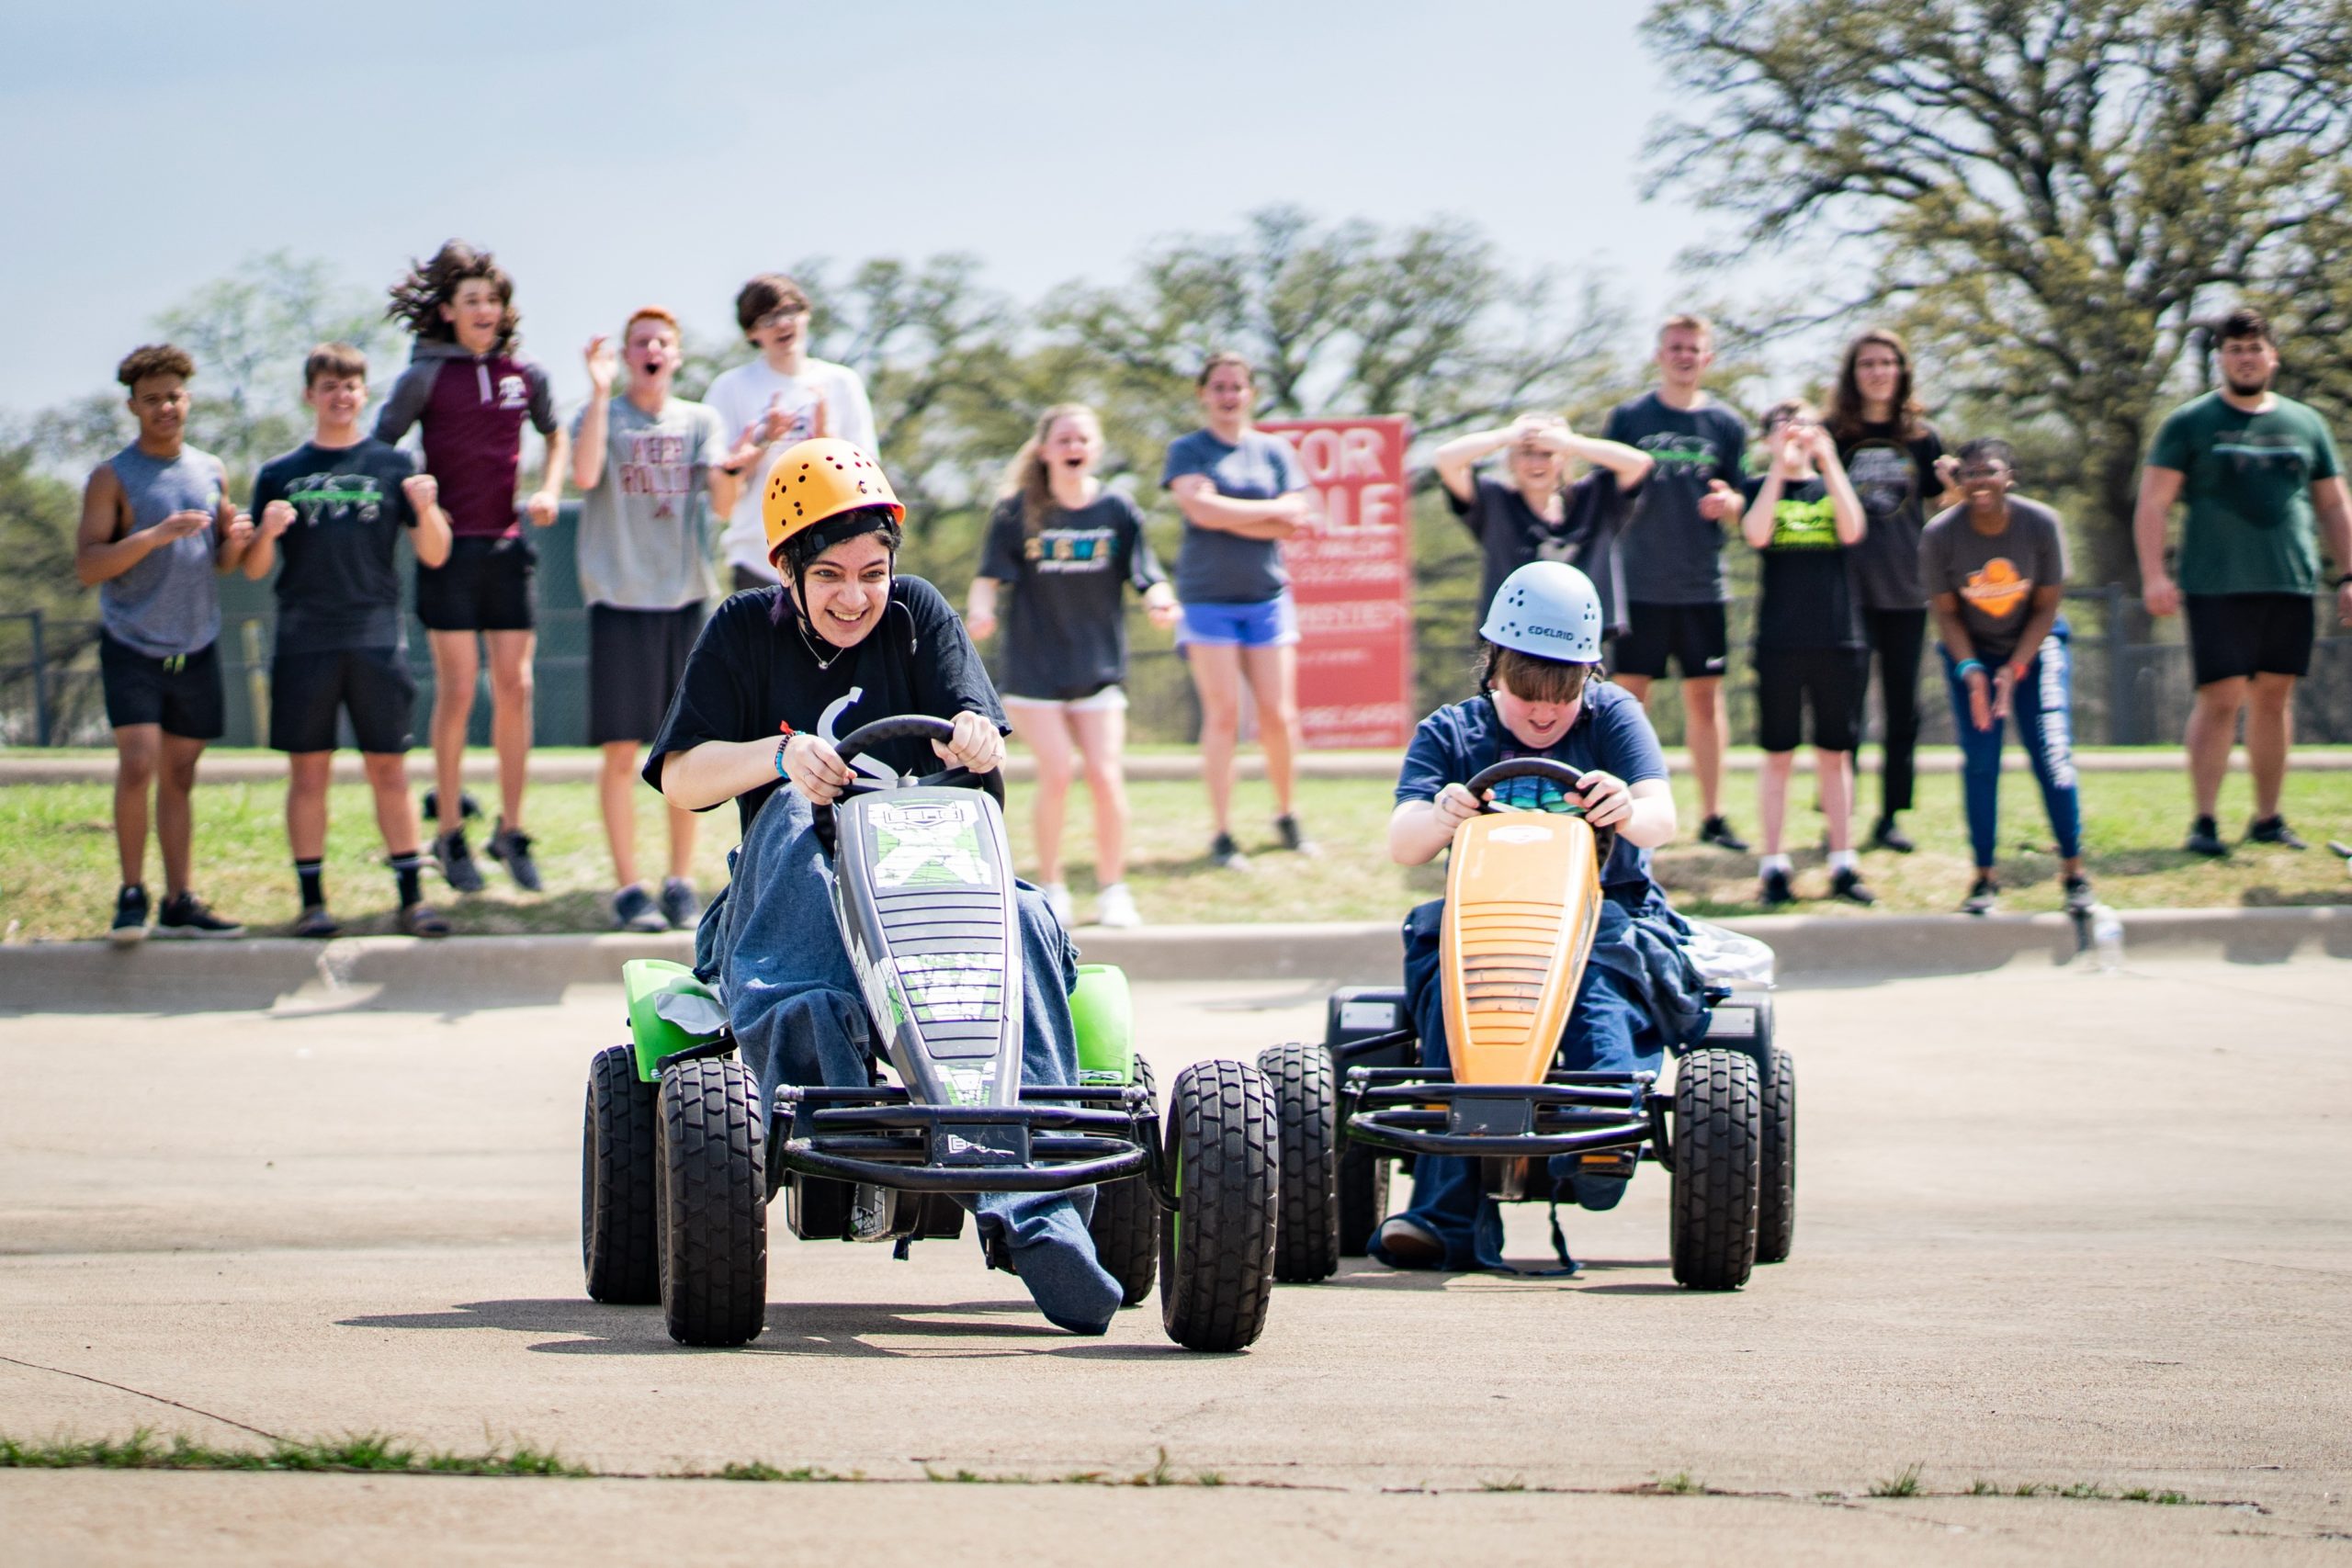 Two students racing on go-carts during a church youth portable event led by Group Dynamix